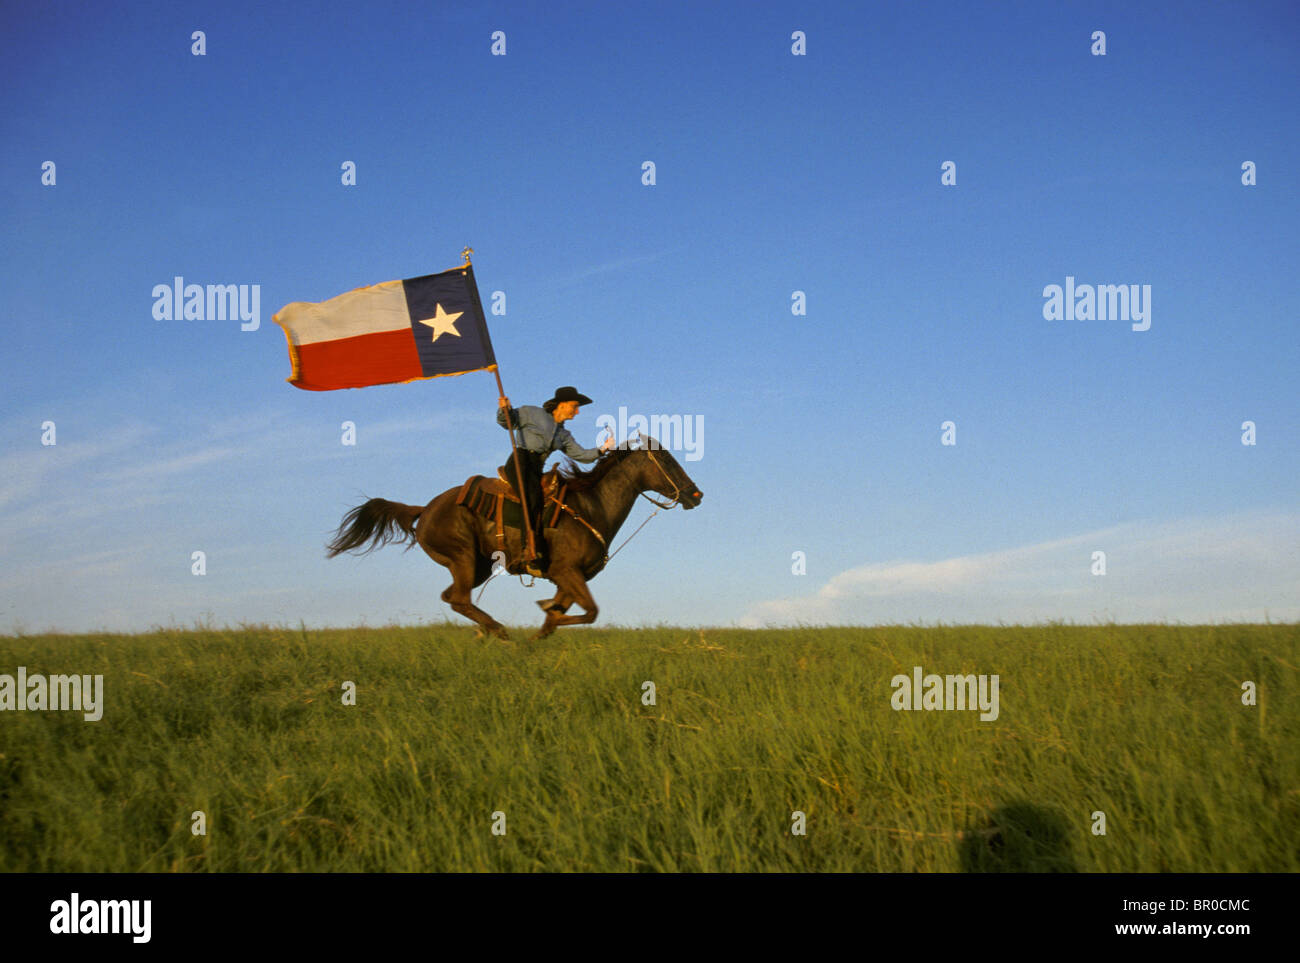 Woman on horseback galloping with Texas Flag. Stock Photo